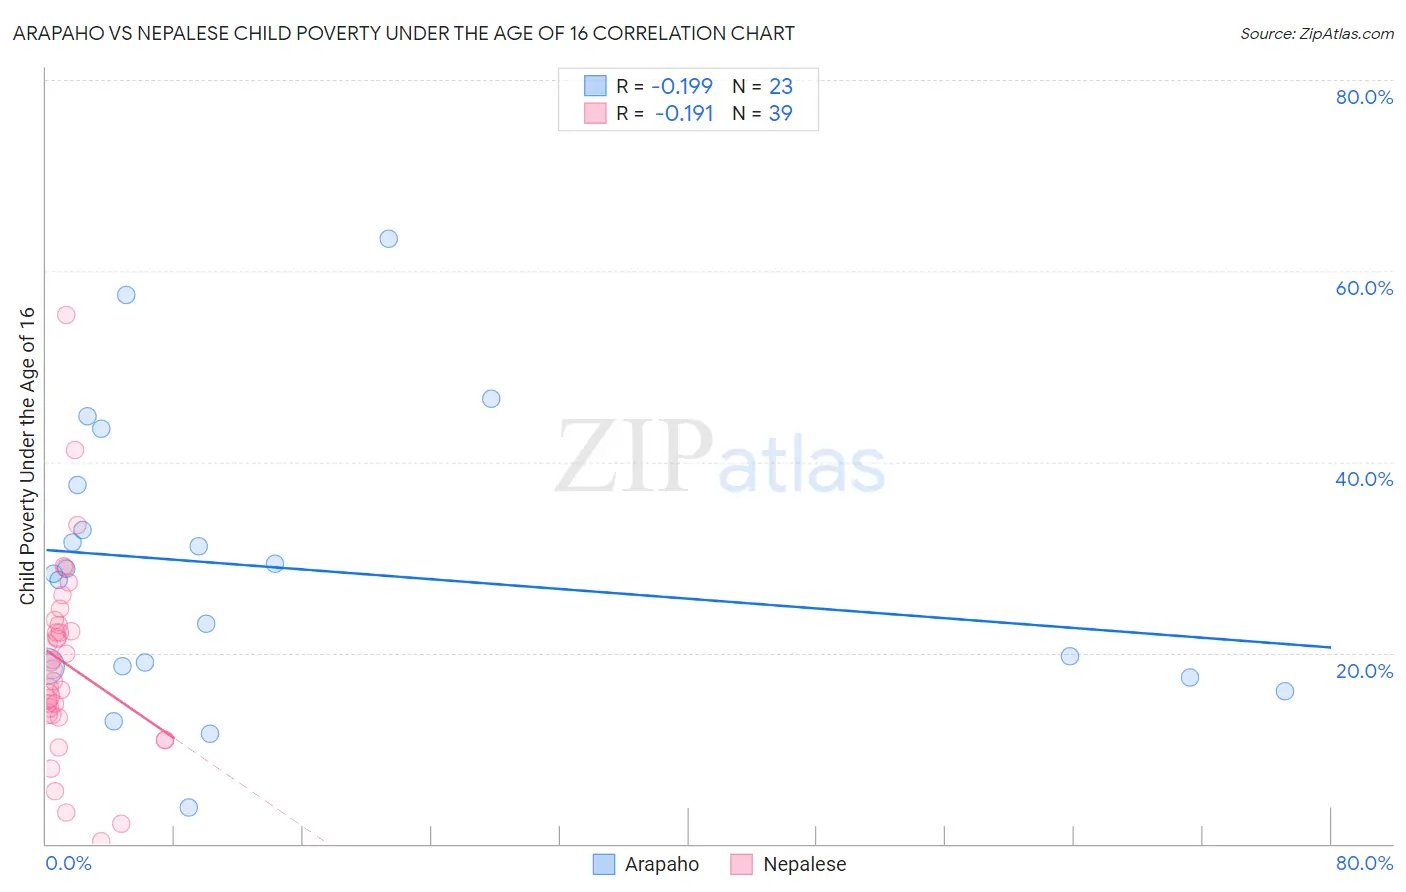 Arapaho vs Nepalese Child Poverty Under the Age of 16